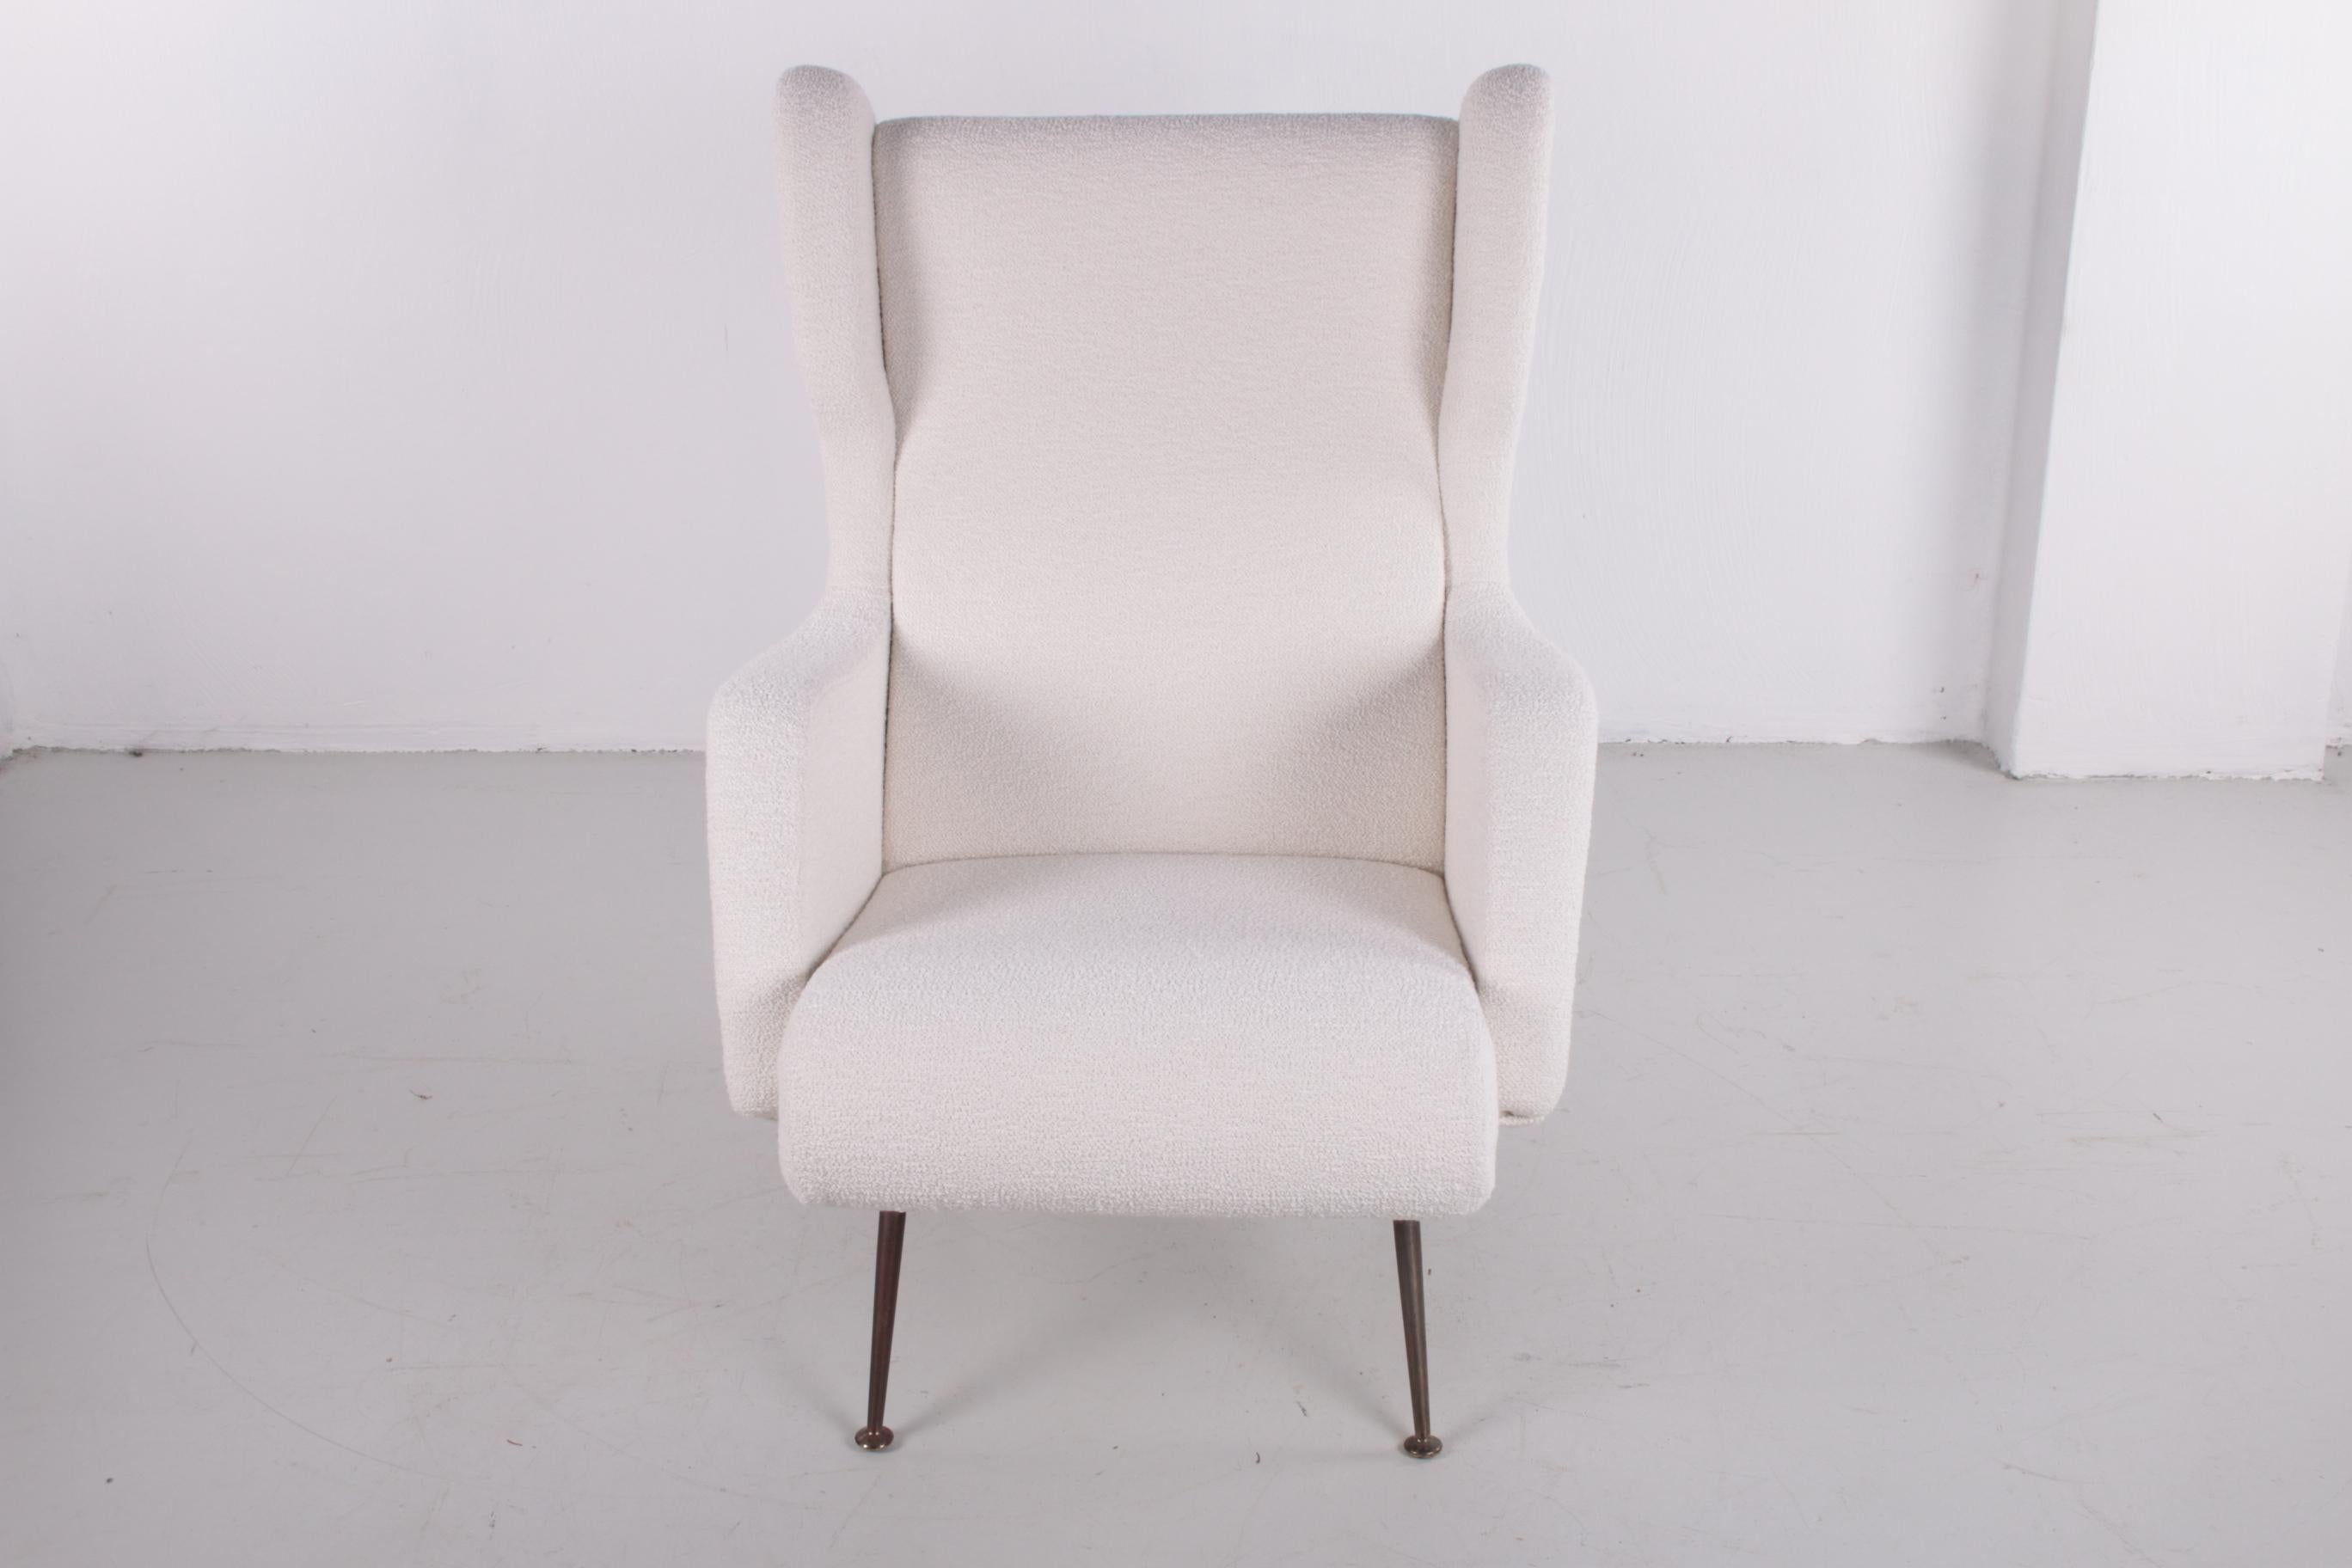 Italian Armchair by Marco Zanuso for Arflex upholstered with Boucle, 1960 For Sale 3